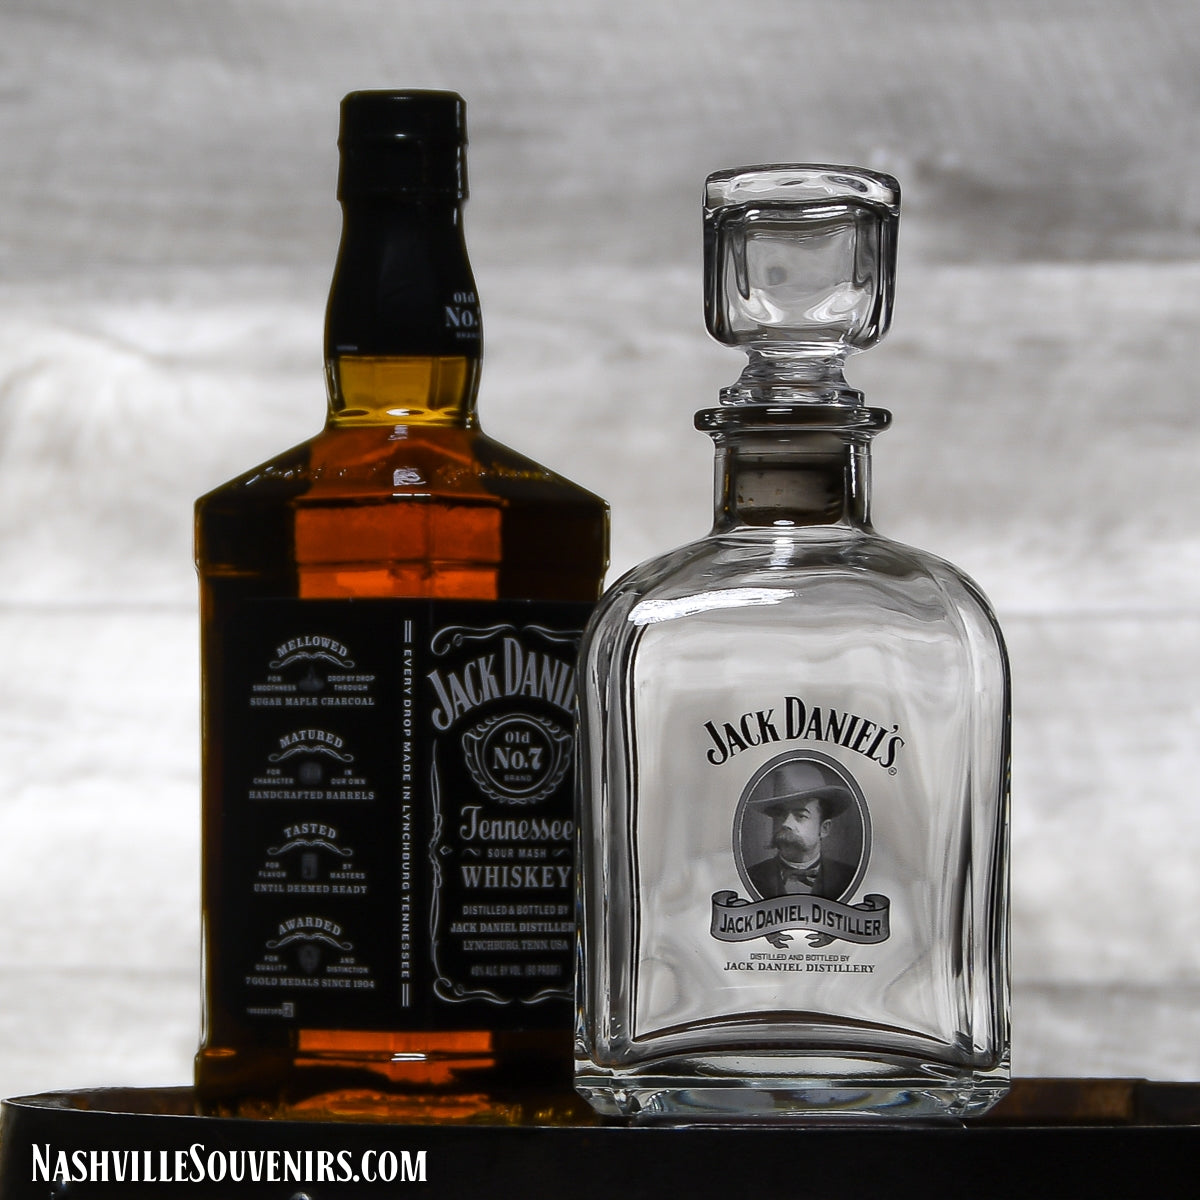 Show your friends what real class looks like, pour from a licensed Jack Daniels Decanter featuring "Jack Lives Here" Logo. And as a bonus you'll get FREE SHIPPING on all US orders over $75!